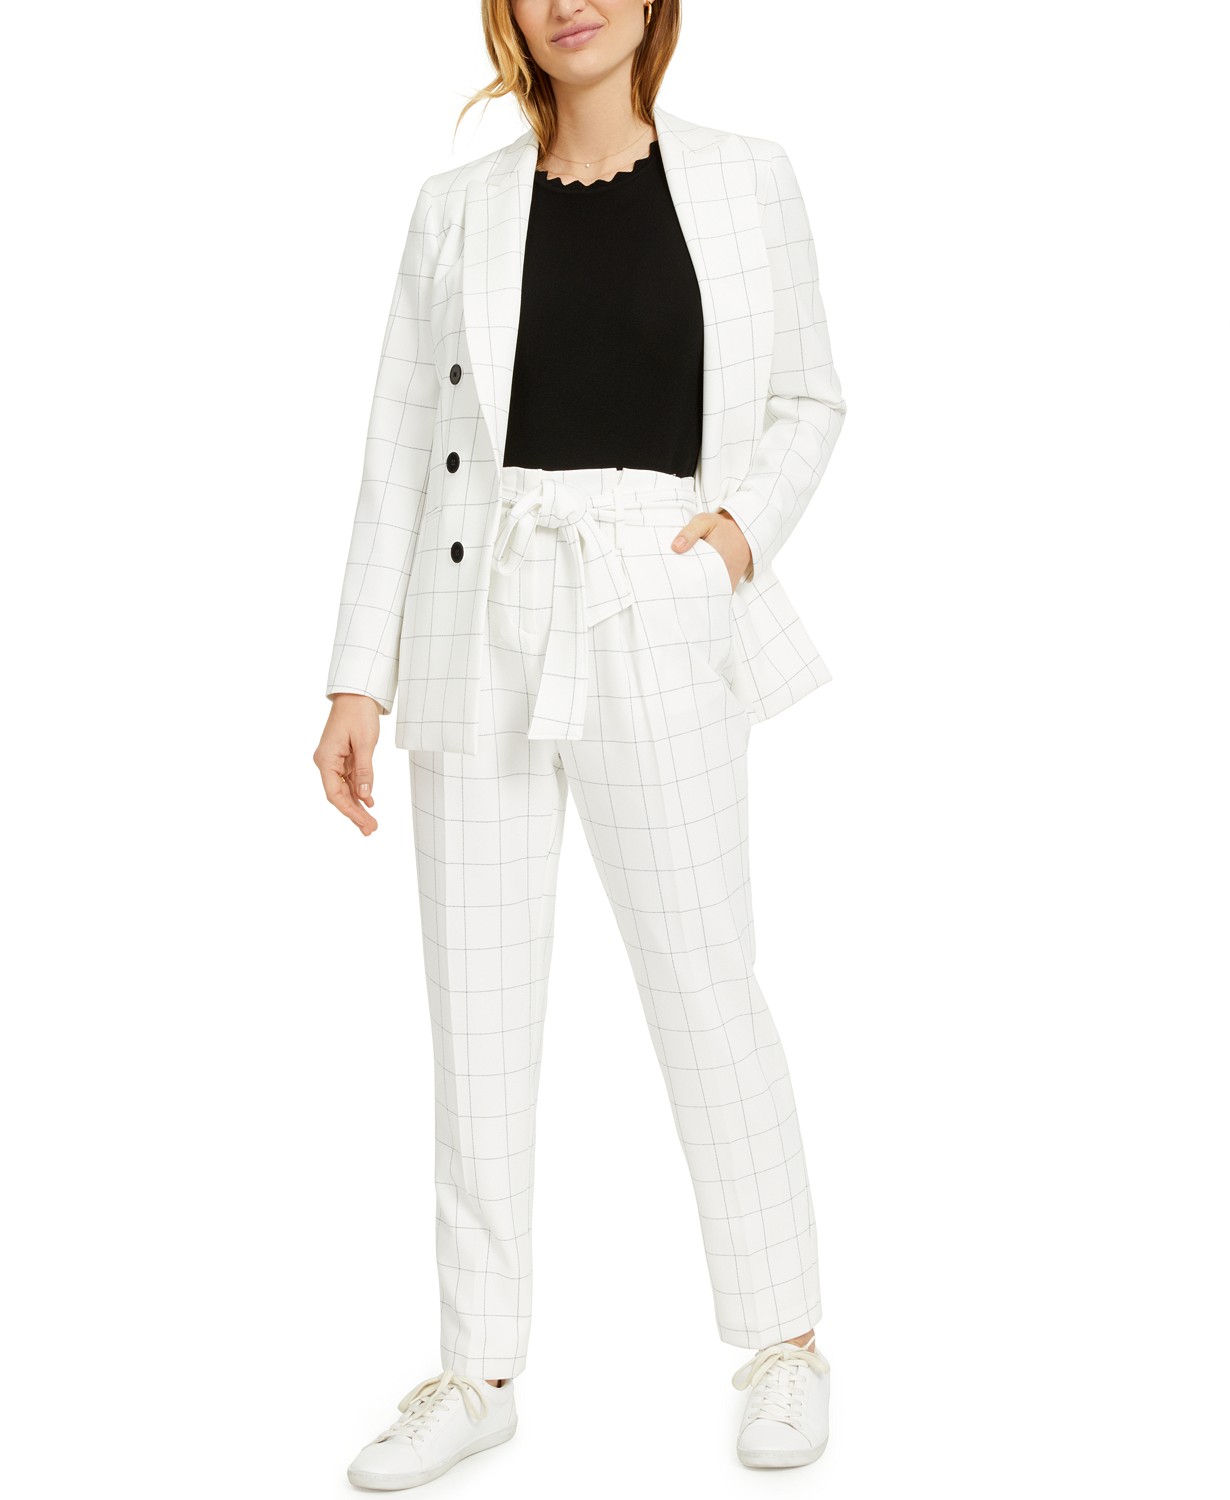 Windowpane Plaid Jacket, Knit Top & Belted Pants, Created for Macy's